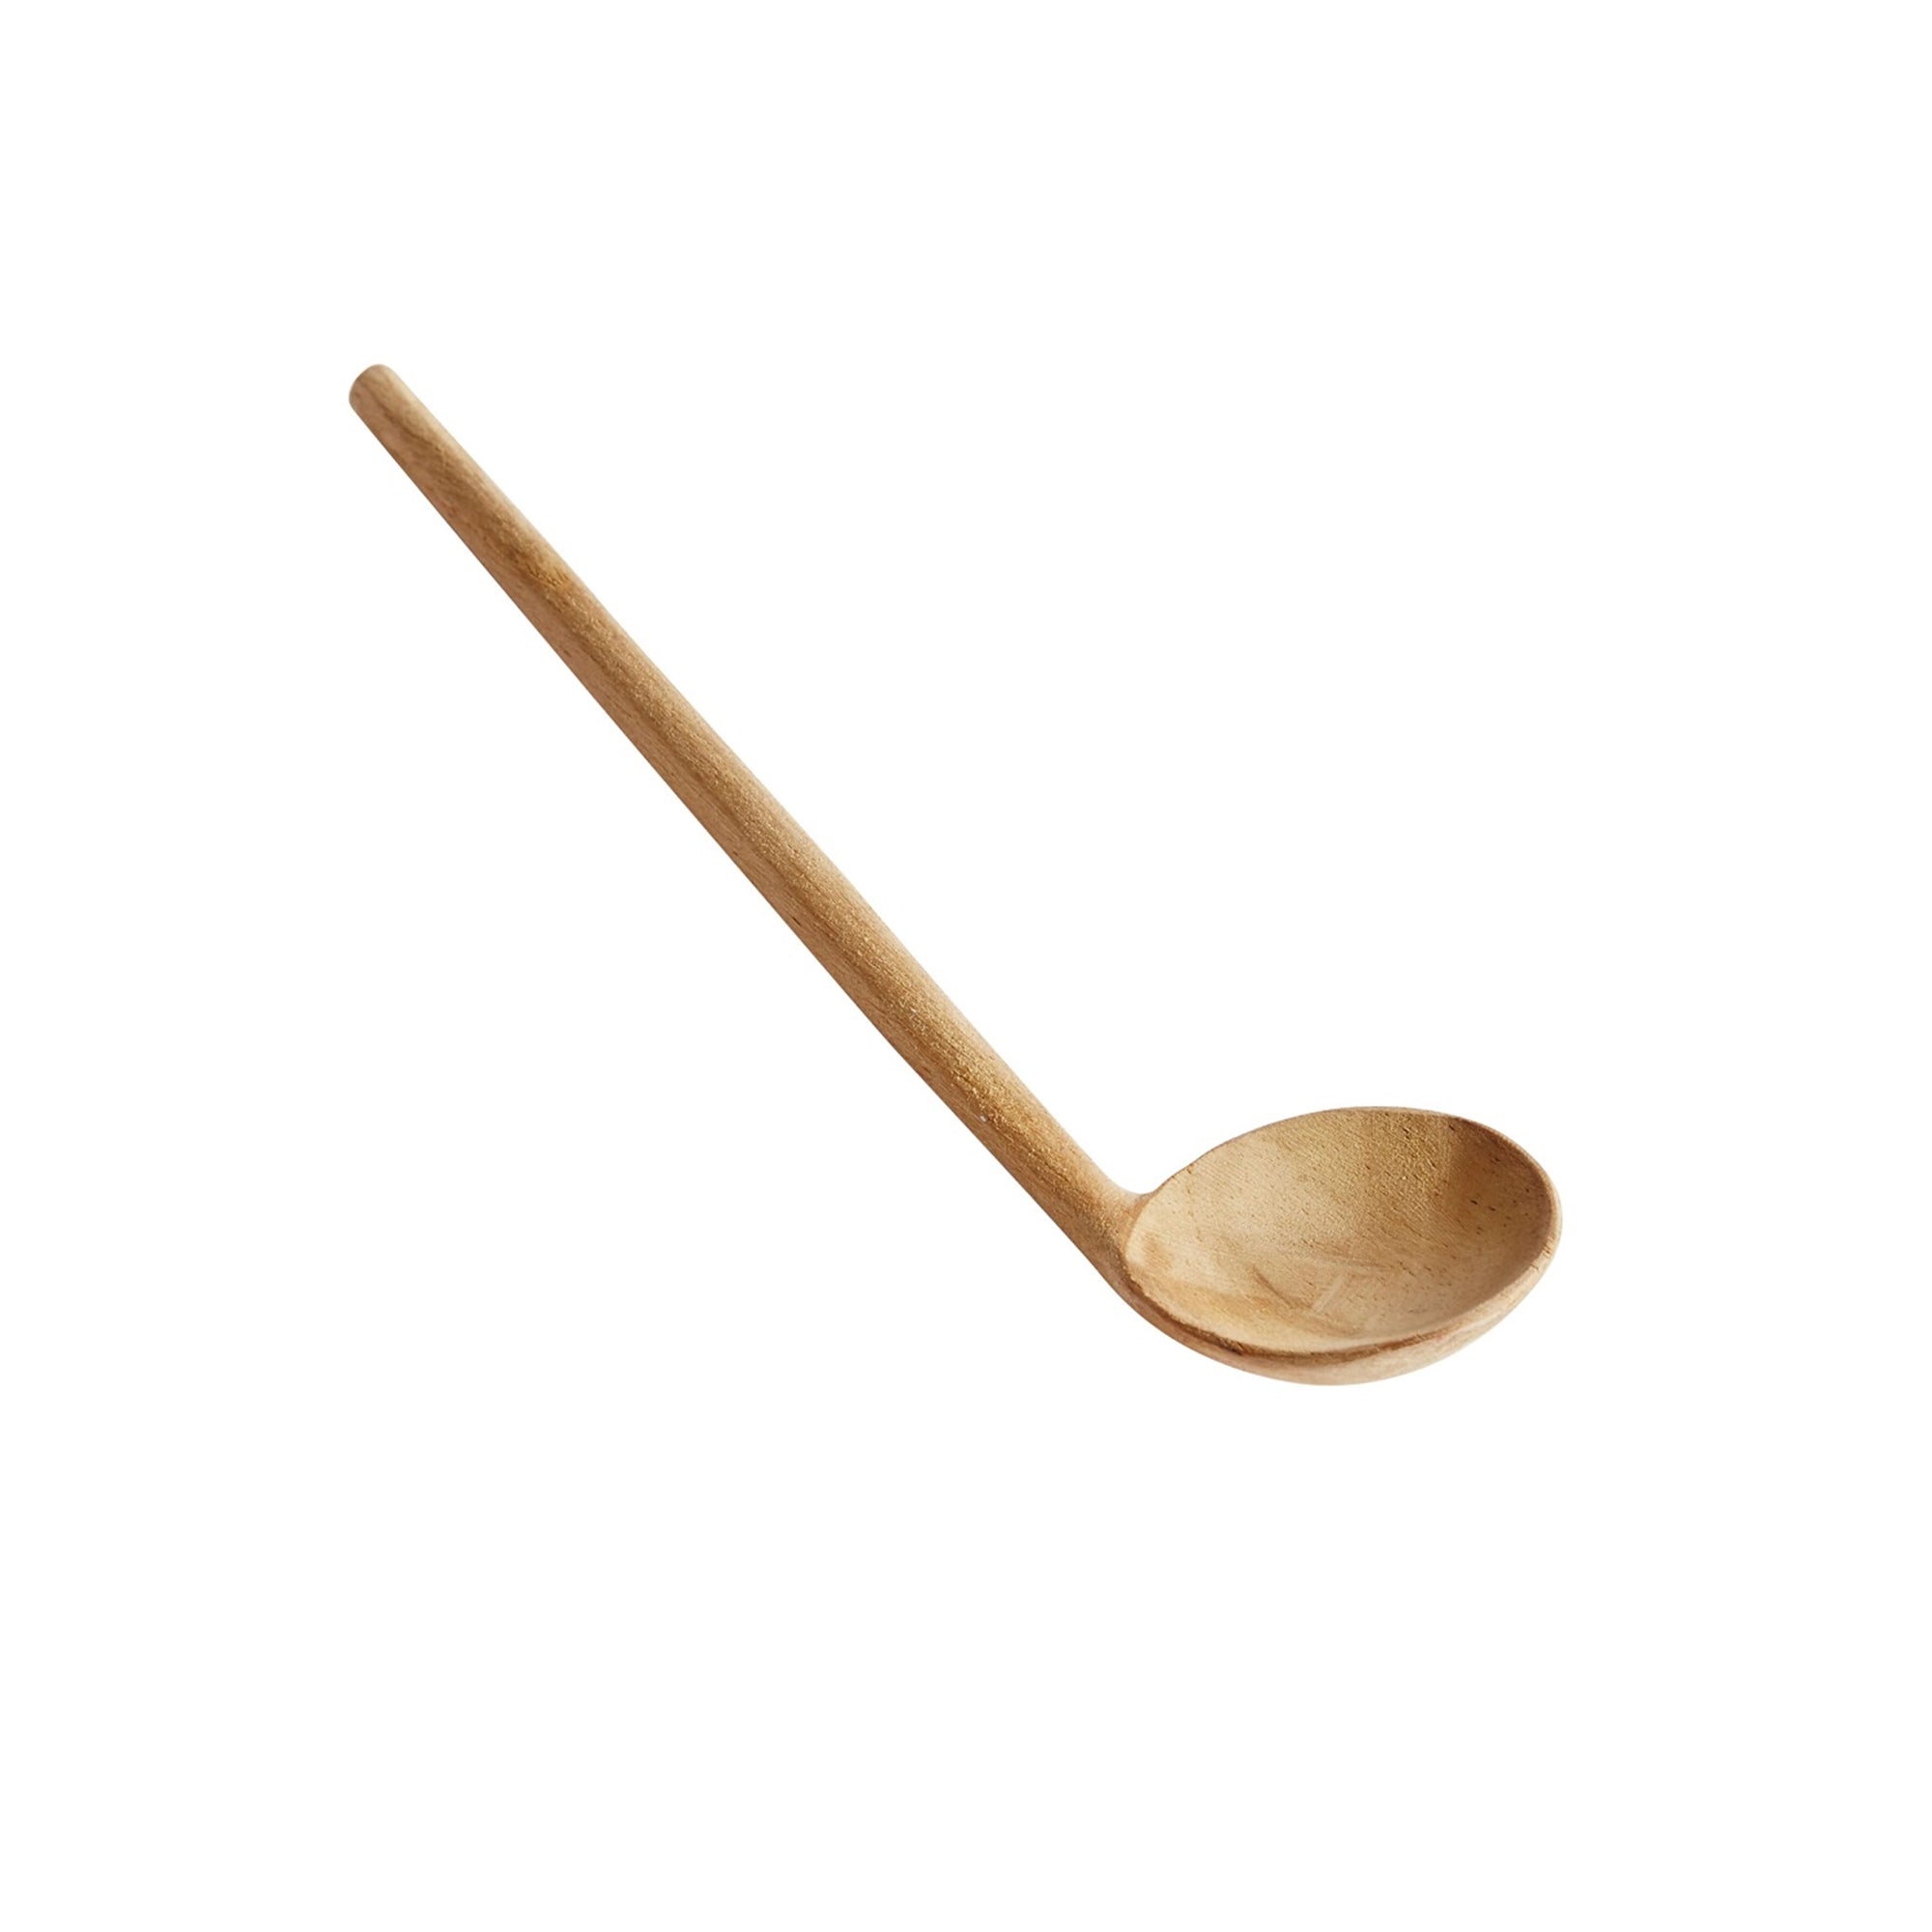 Olive Spoon and Fork